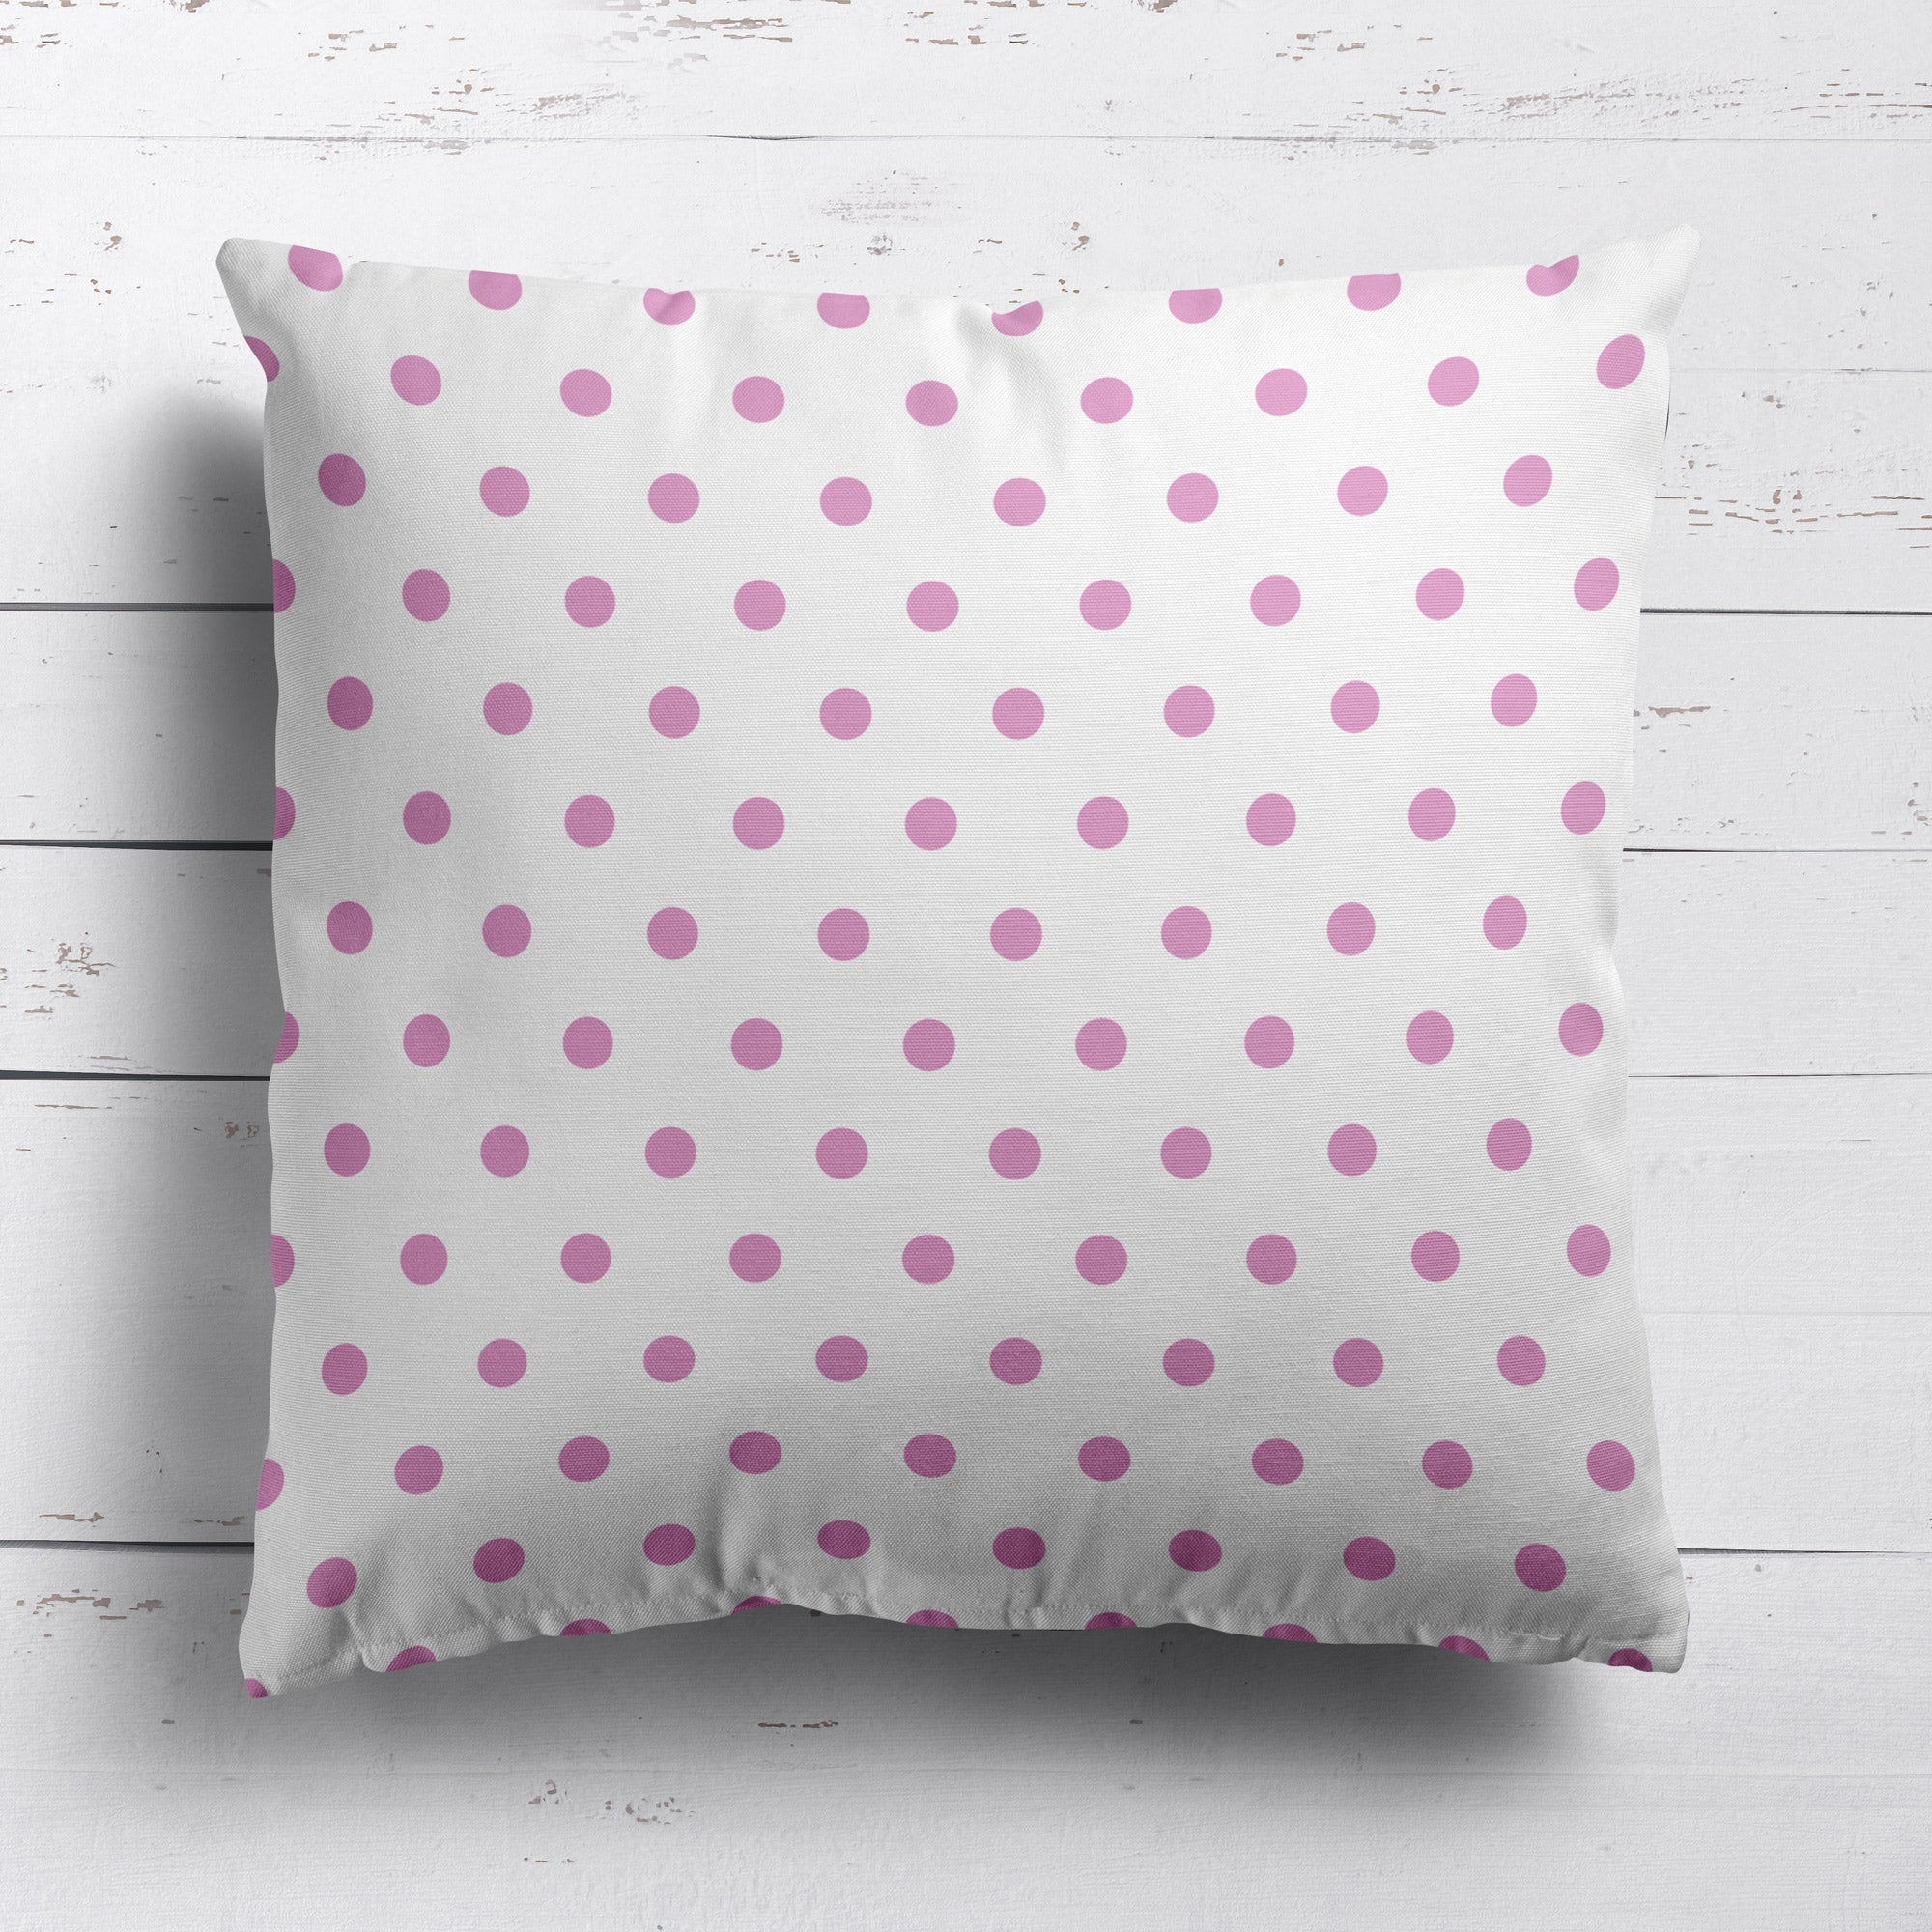 Spotty Day Fabric - Tickled Pink